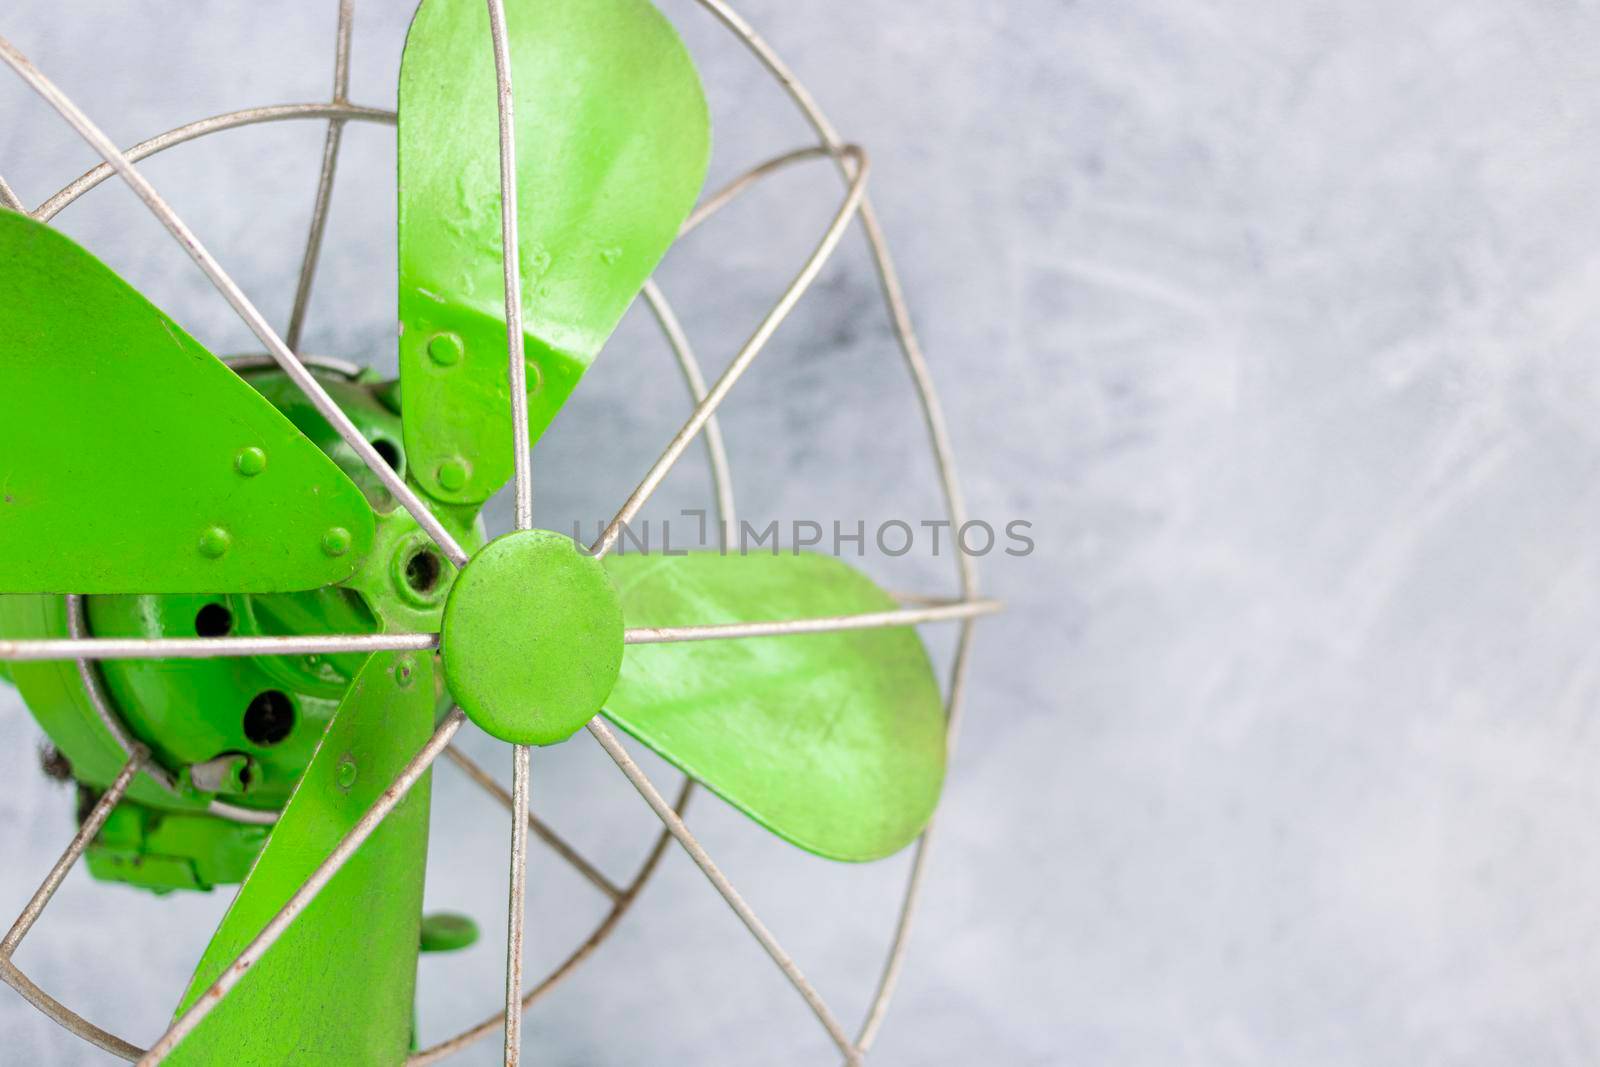 Retro fan of green color as decoration by eagg13